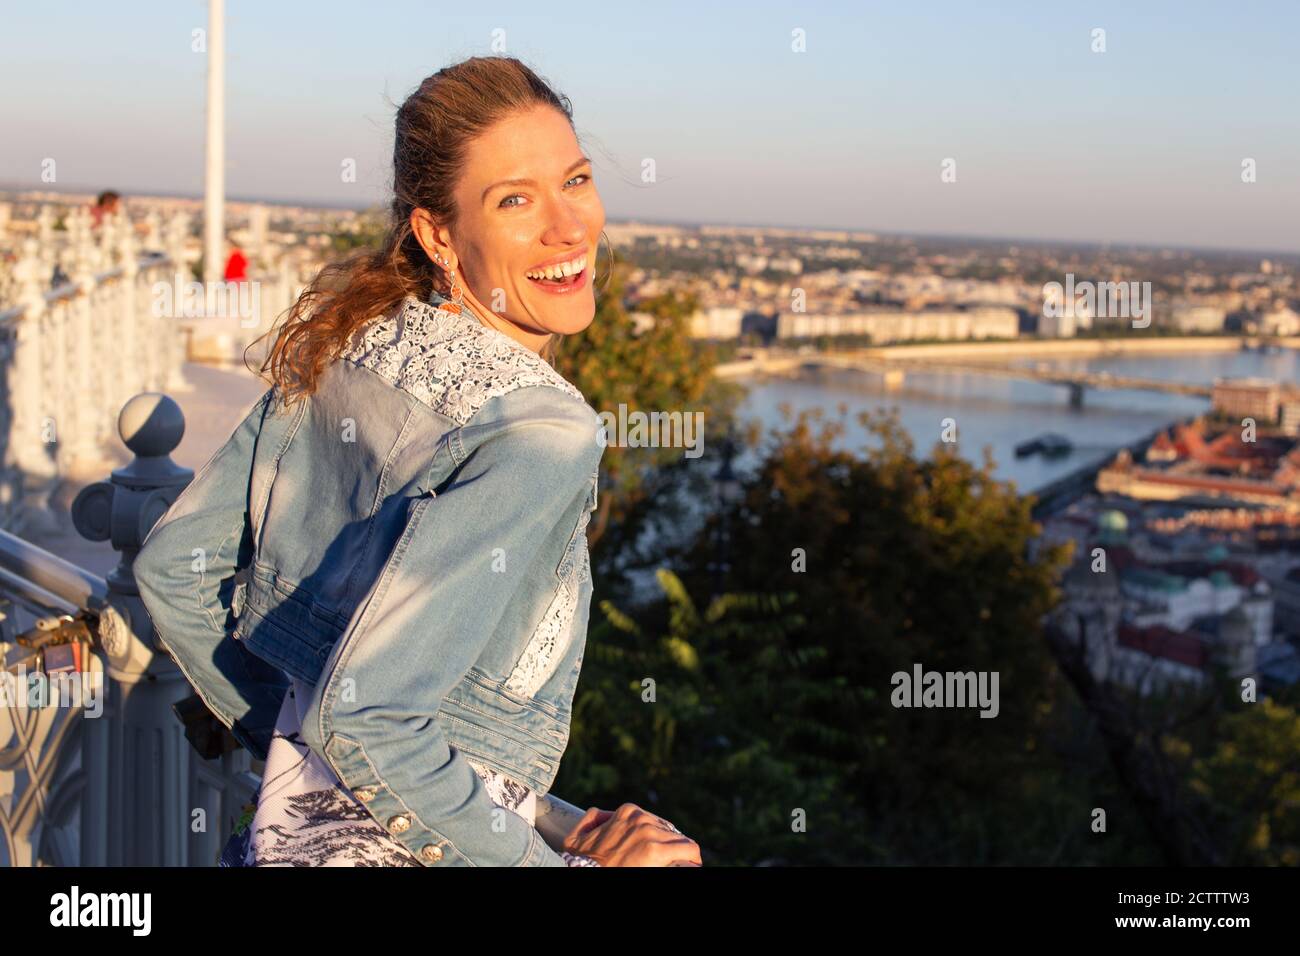 Young carefree urban woman laughing in city sunset Stock Photo